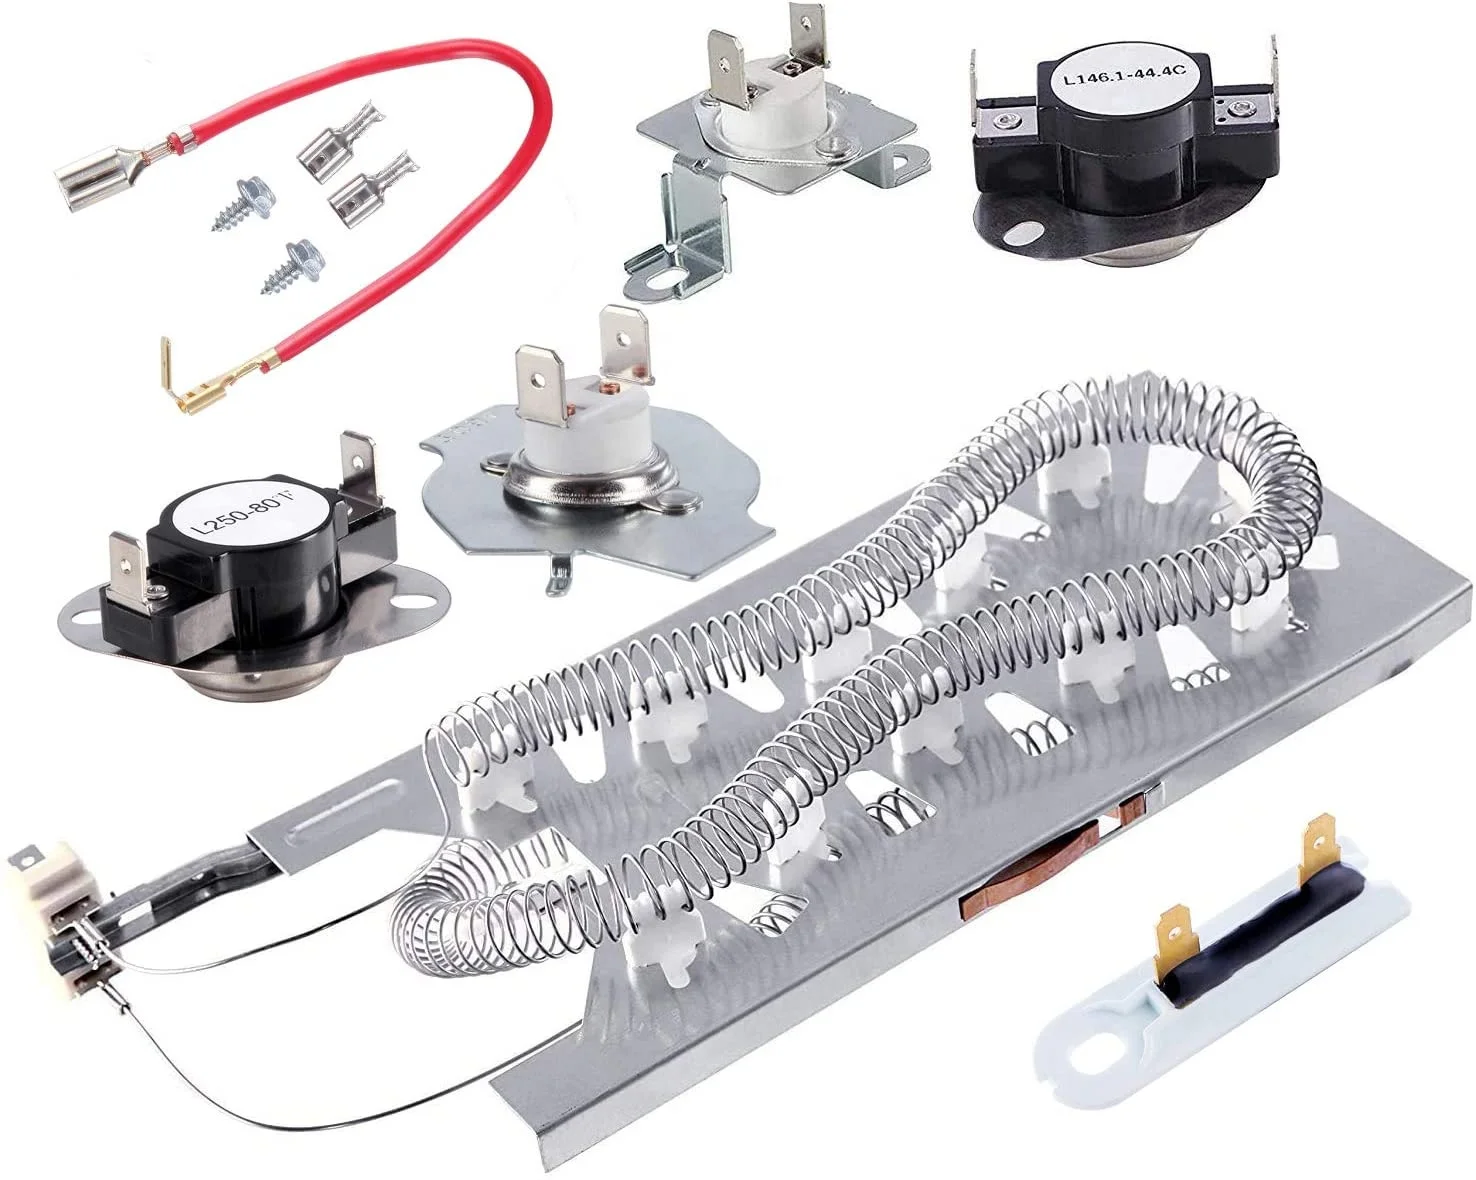 
3387747 Dryer Heating Element & 279816 Thermostat Kit & 279973 3392519 Thermal cut-off Fuse Replacement 